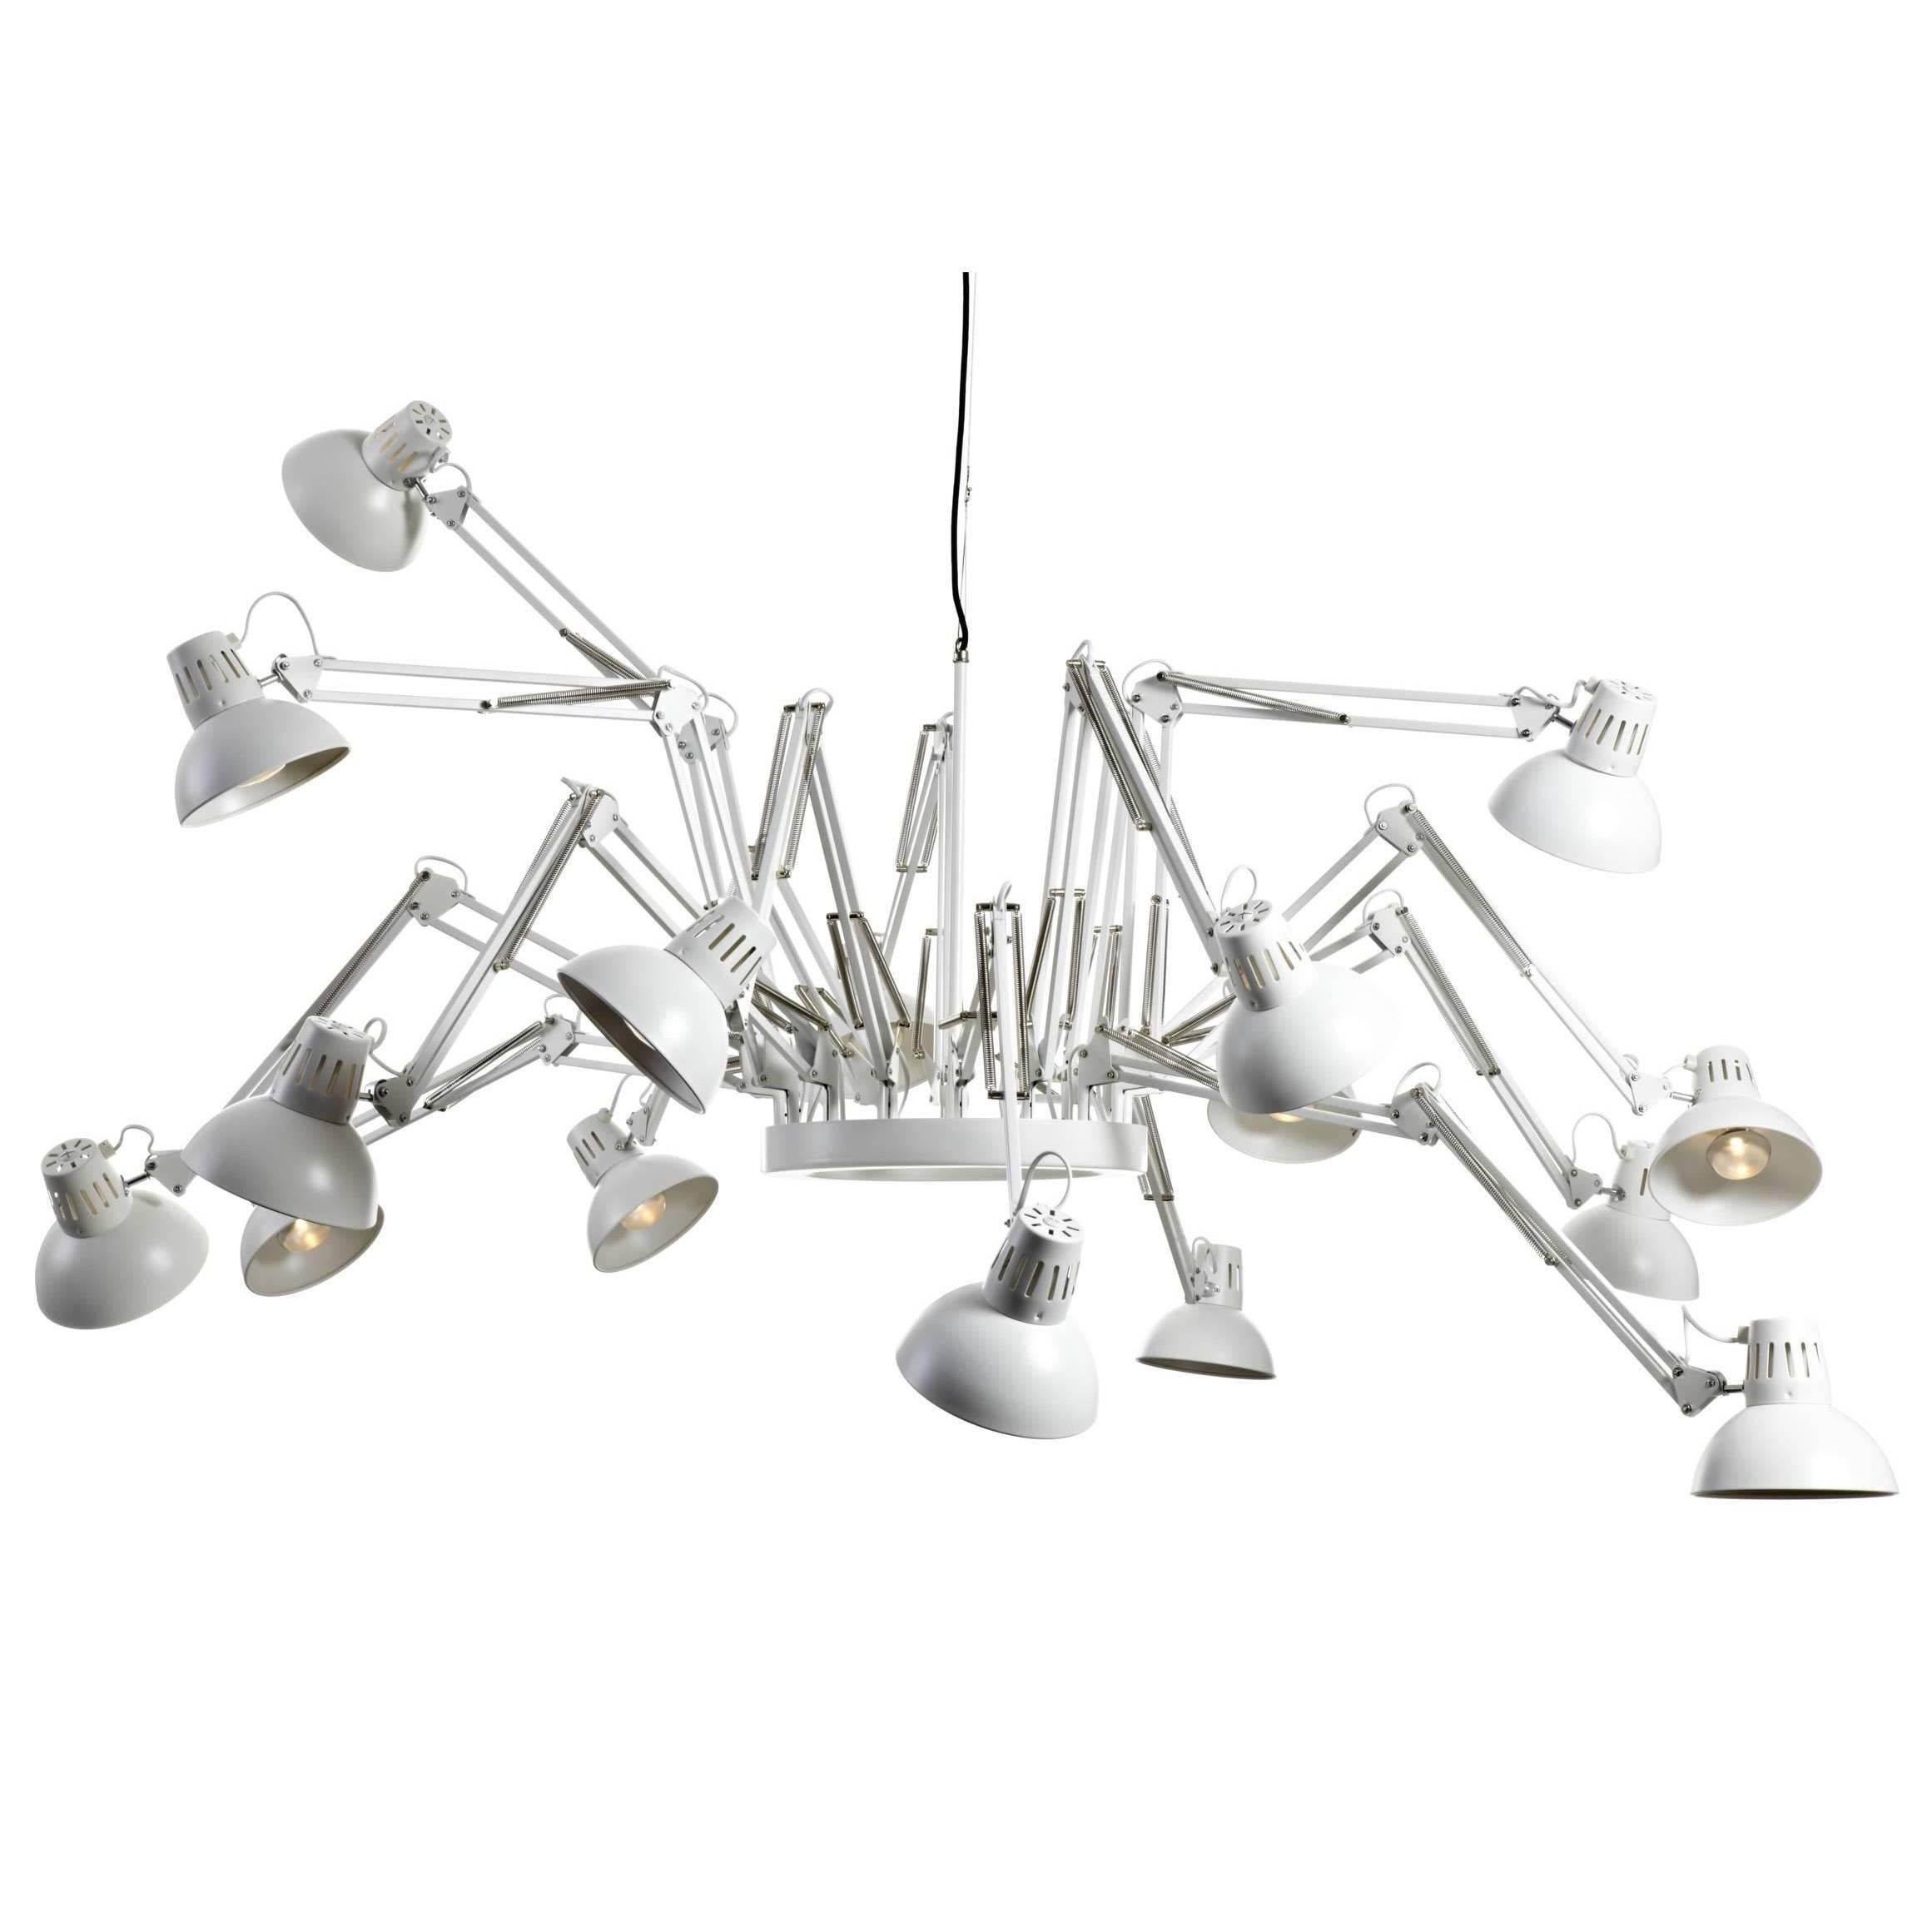 Moooi Dear Ingo by Ron Gilad in Black or White For Sale